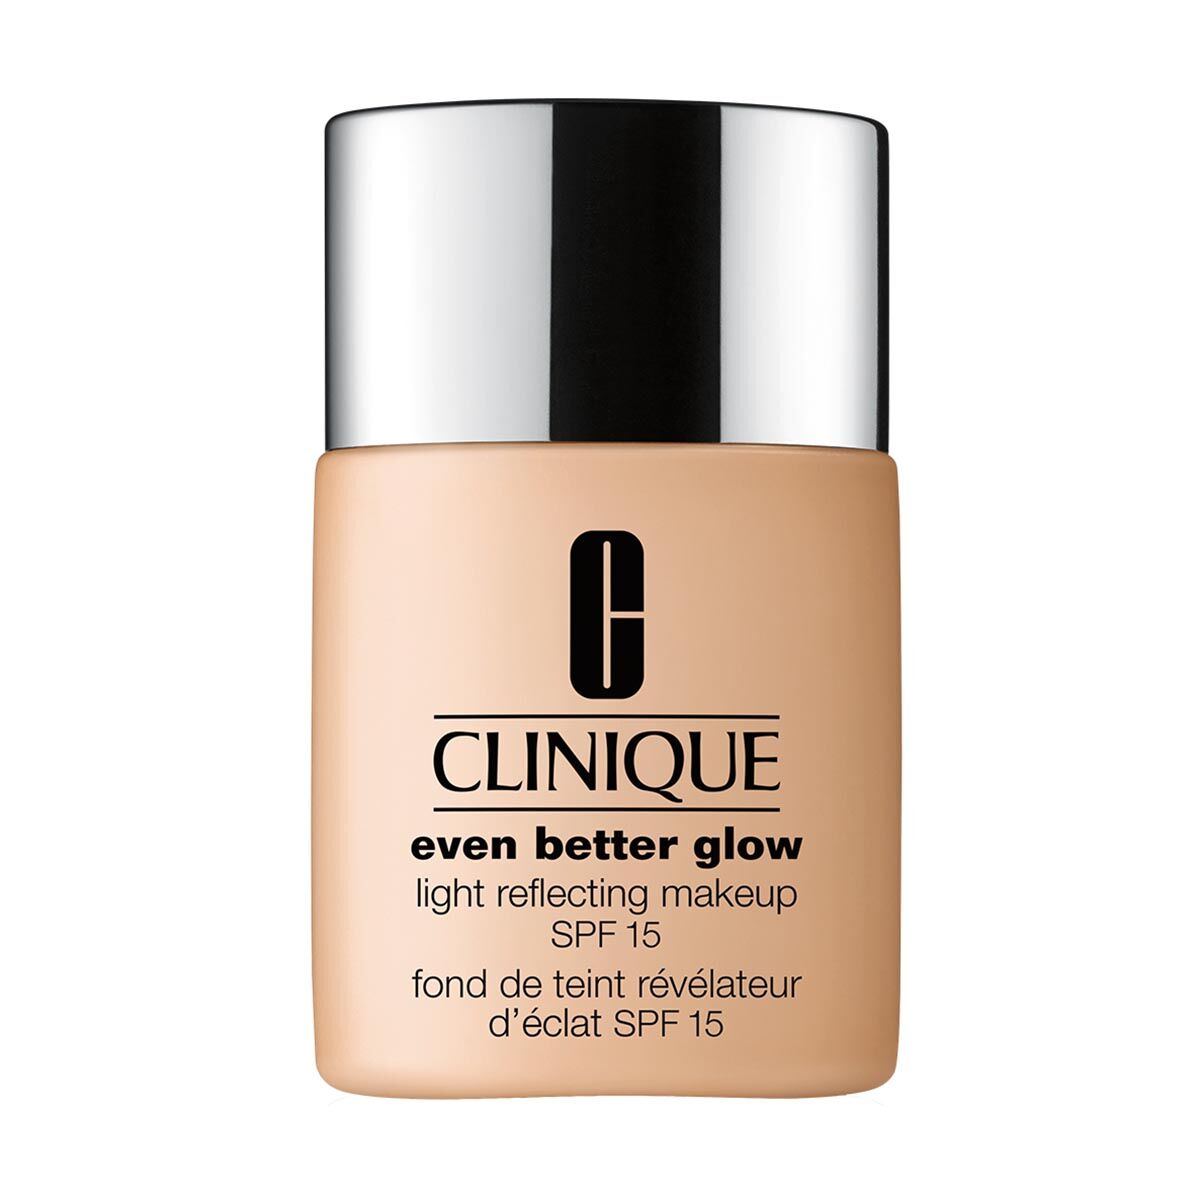 Clinique Even Better Glow Light Reflecting Makeup SPF15 toasted